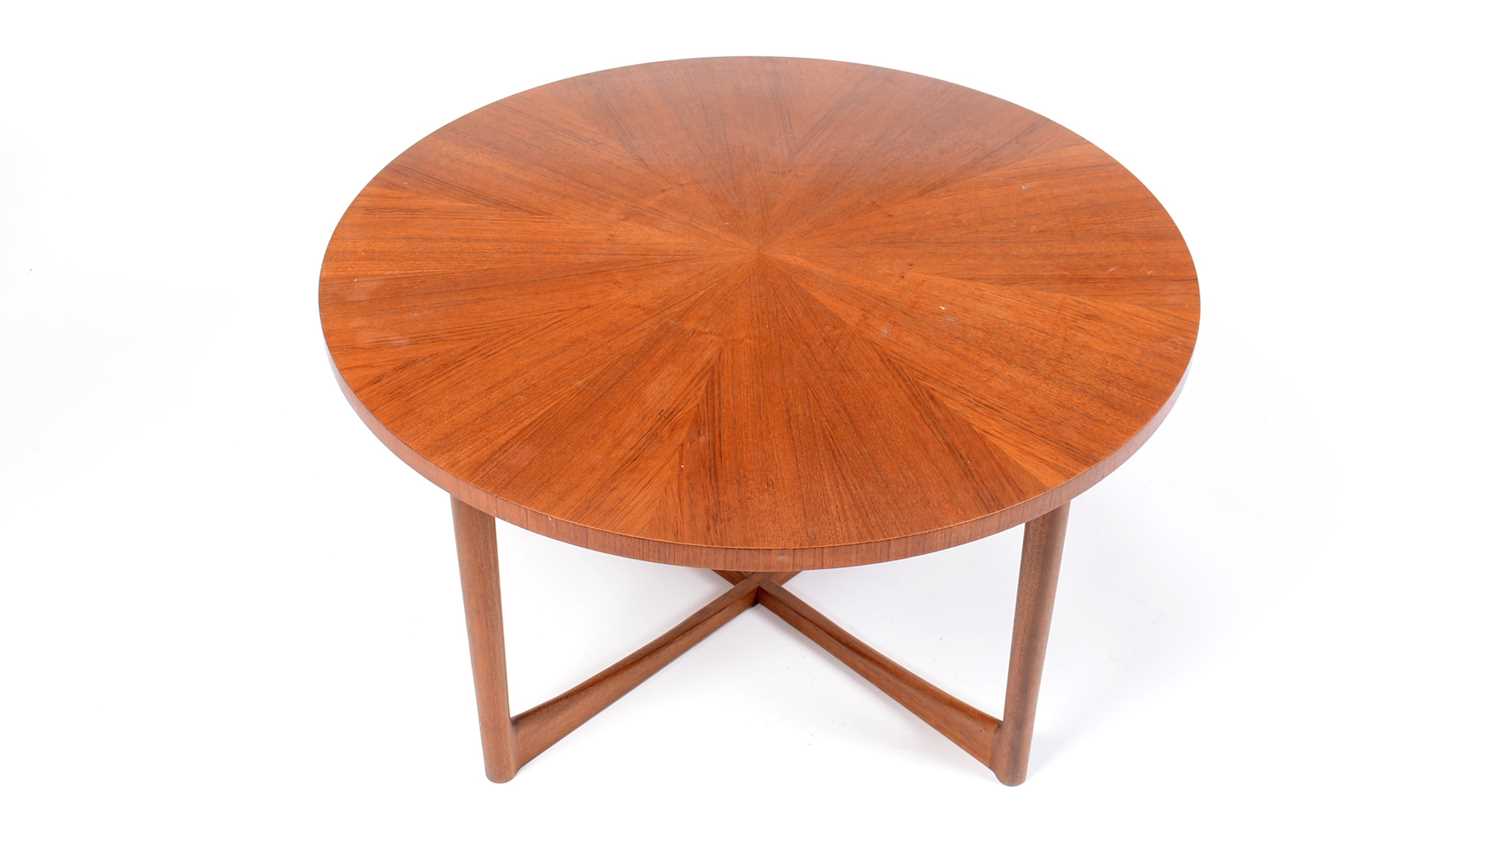 Lot 81 - Attributed to A.H McIntosh of Kirkaldy - a retro vintage 20th Century teakwood coffee table